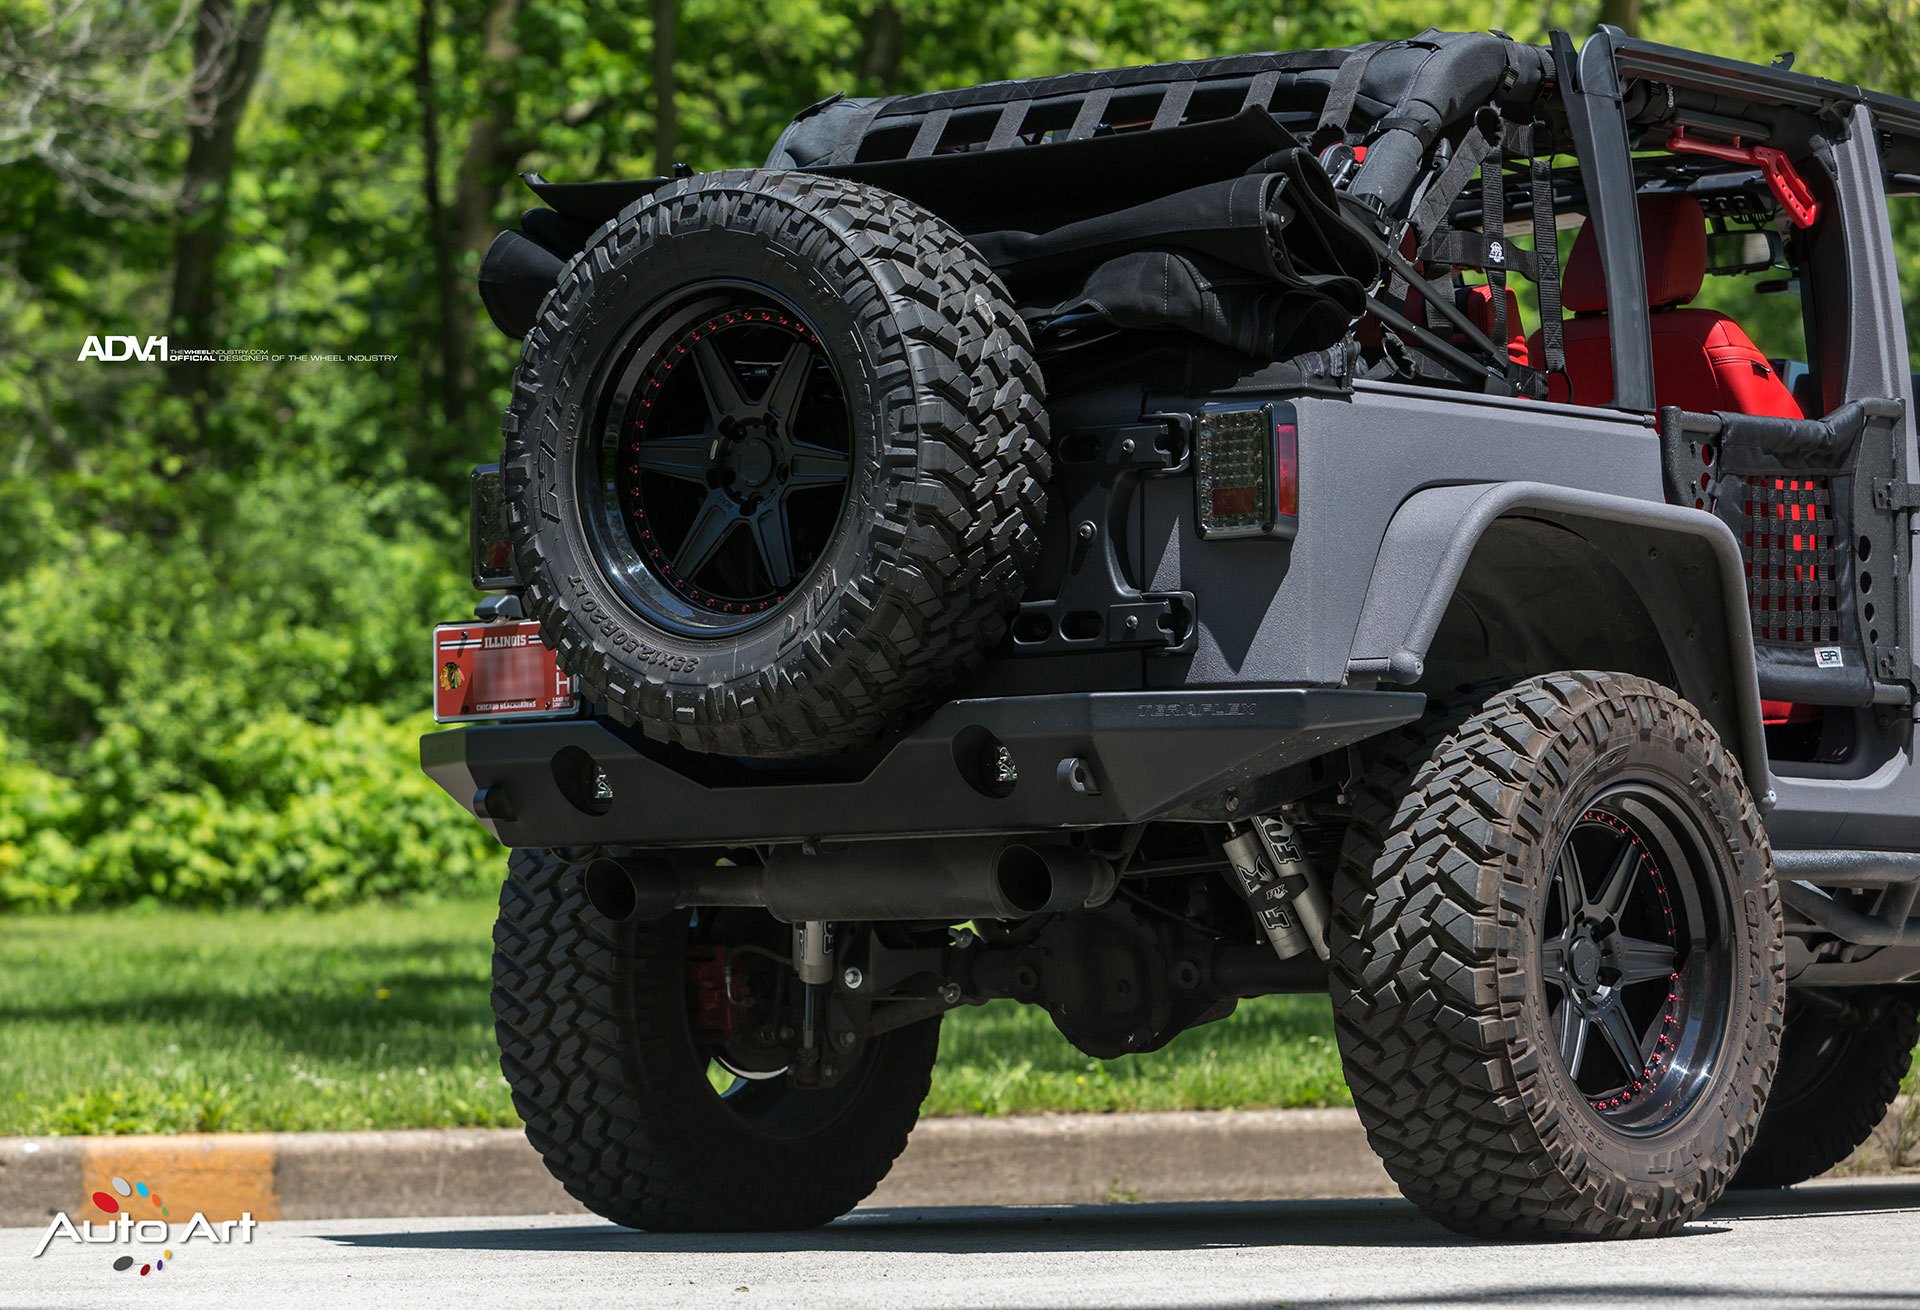 lamtac encounter muscle monster soflo jeeps builds a x wheels with hp engine block costing more than thousand dollars 64d5dfb19a283 Encounter "muscle Monster" Soflo Jeeps Builds A 6x6 6 Wheels With 700 Hp Engine Block Costing More Than 400 Thousand Dollars